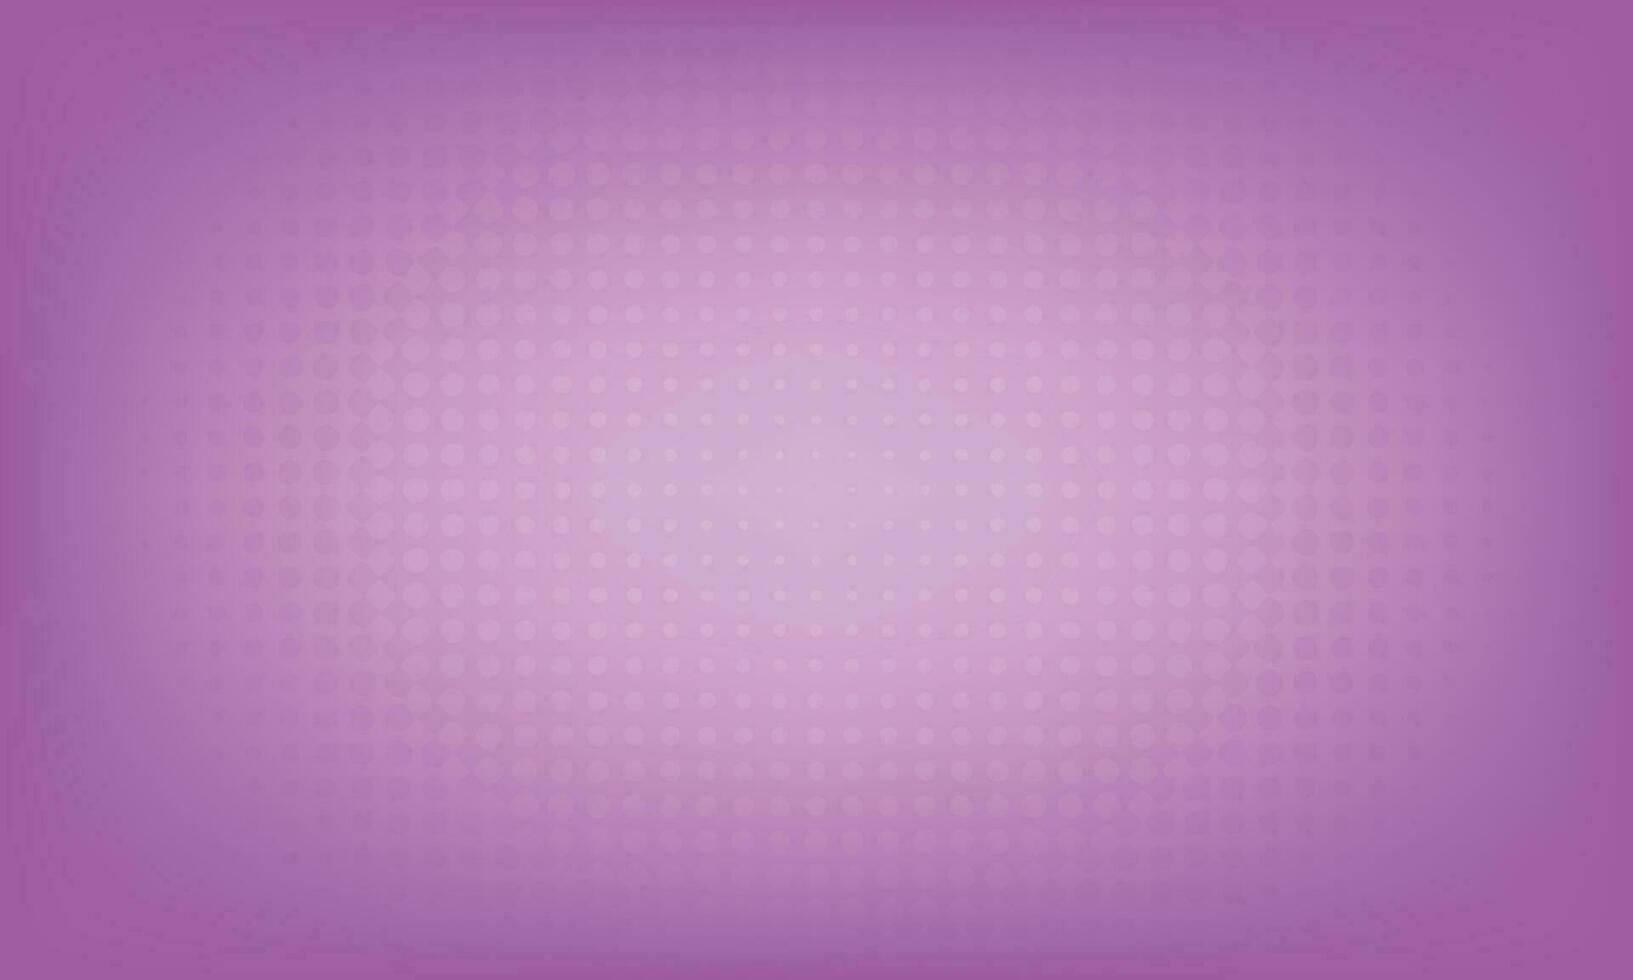 Medium Orchid gradient color thumbnail web banner creative template background vector